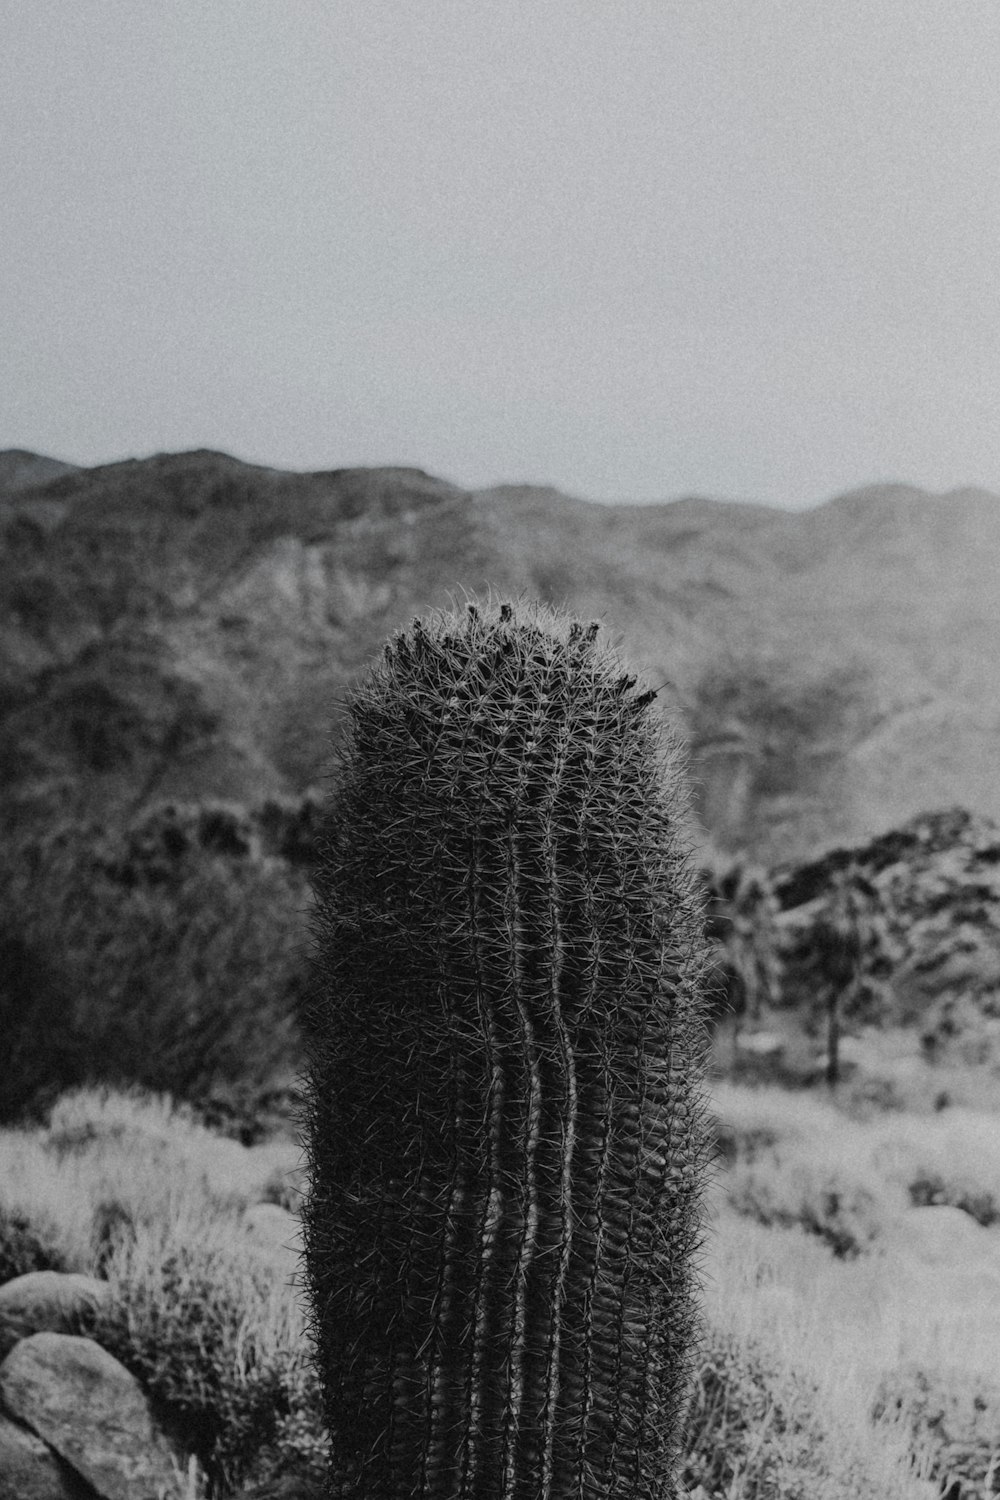 a black and white photo of a cactus in the desert